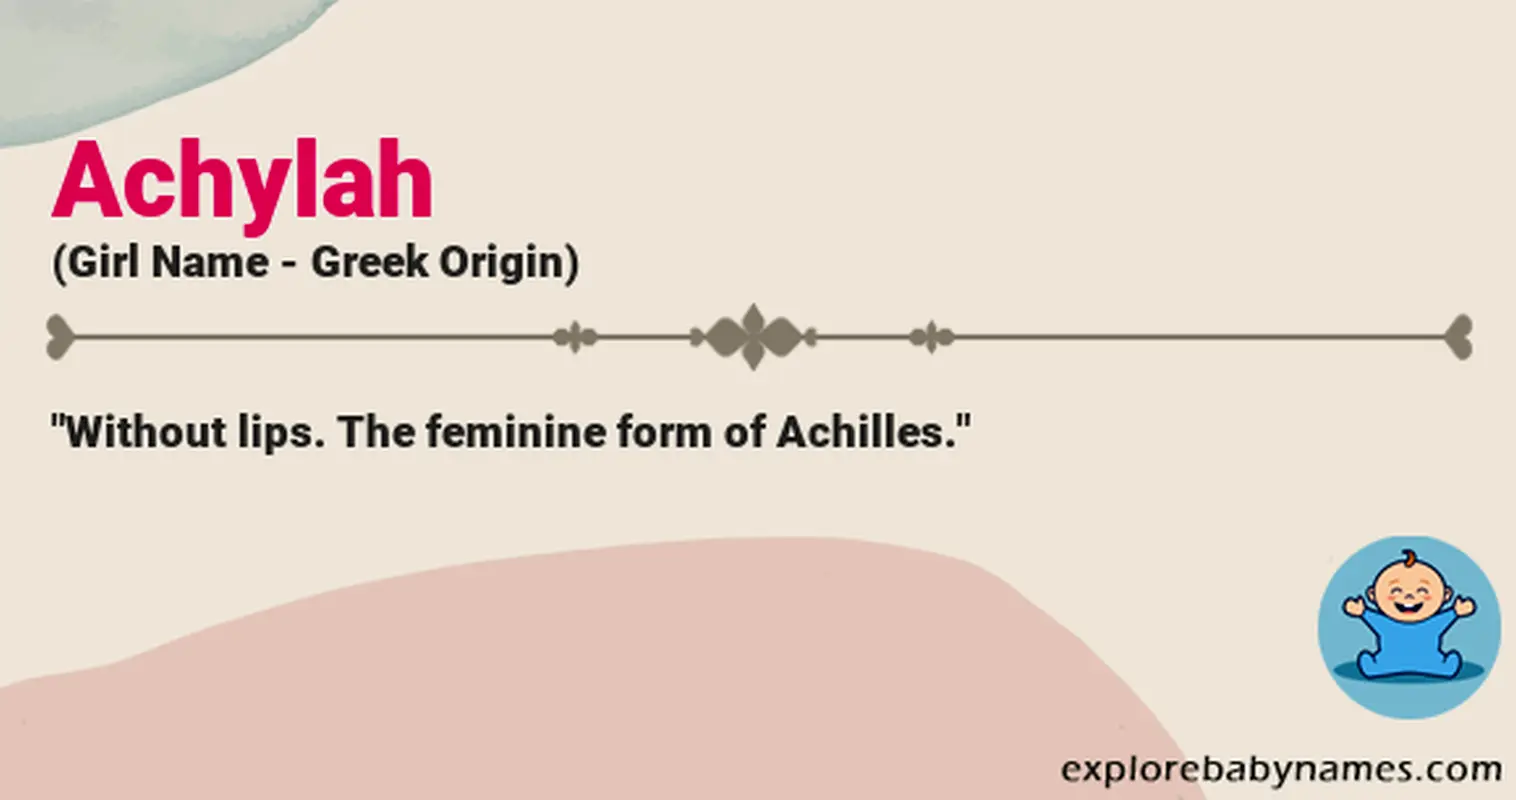 Meaning of Achylah